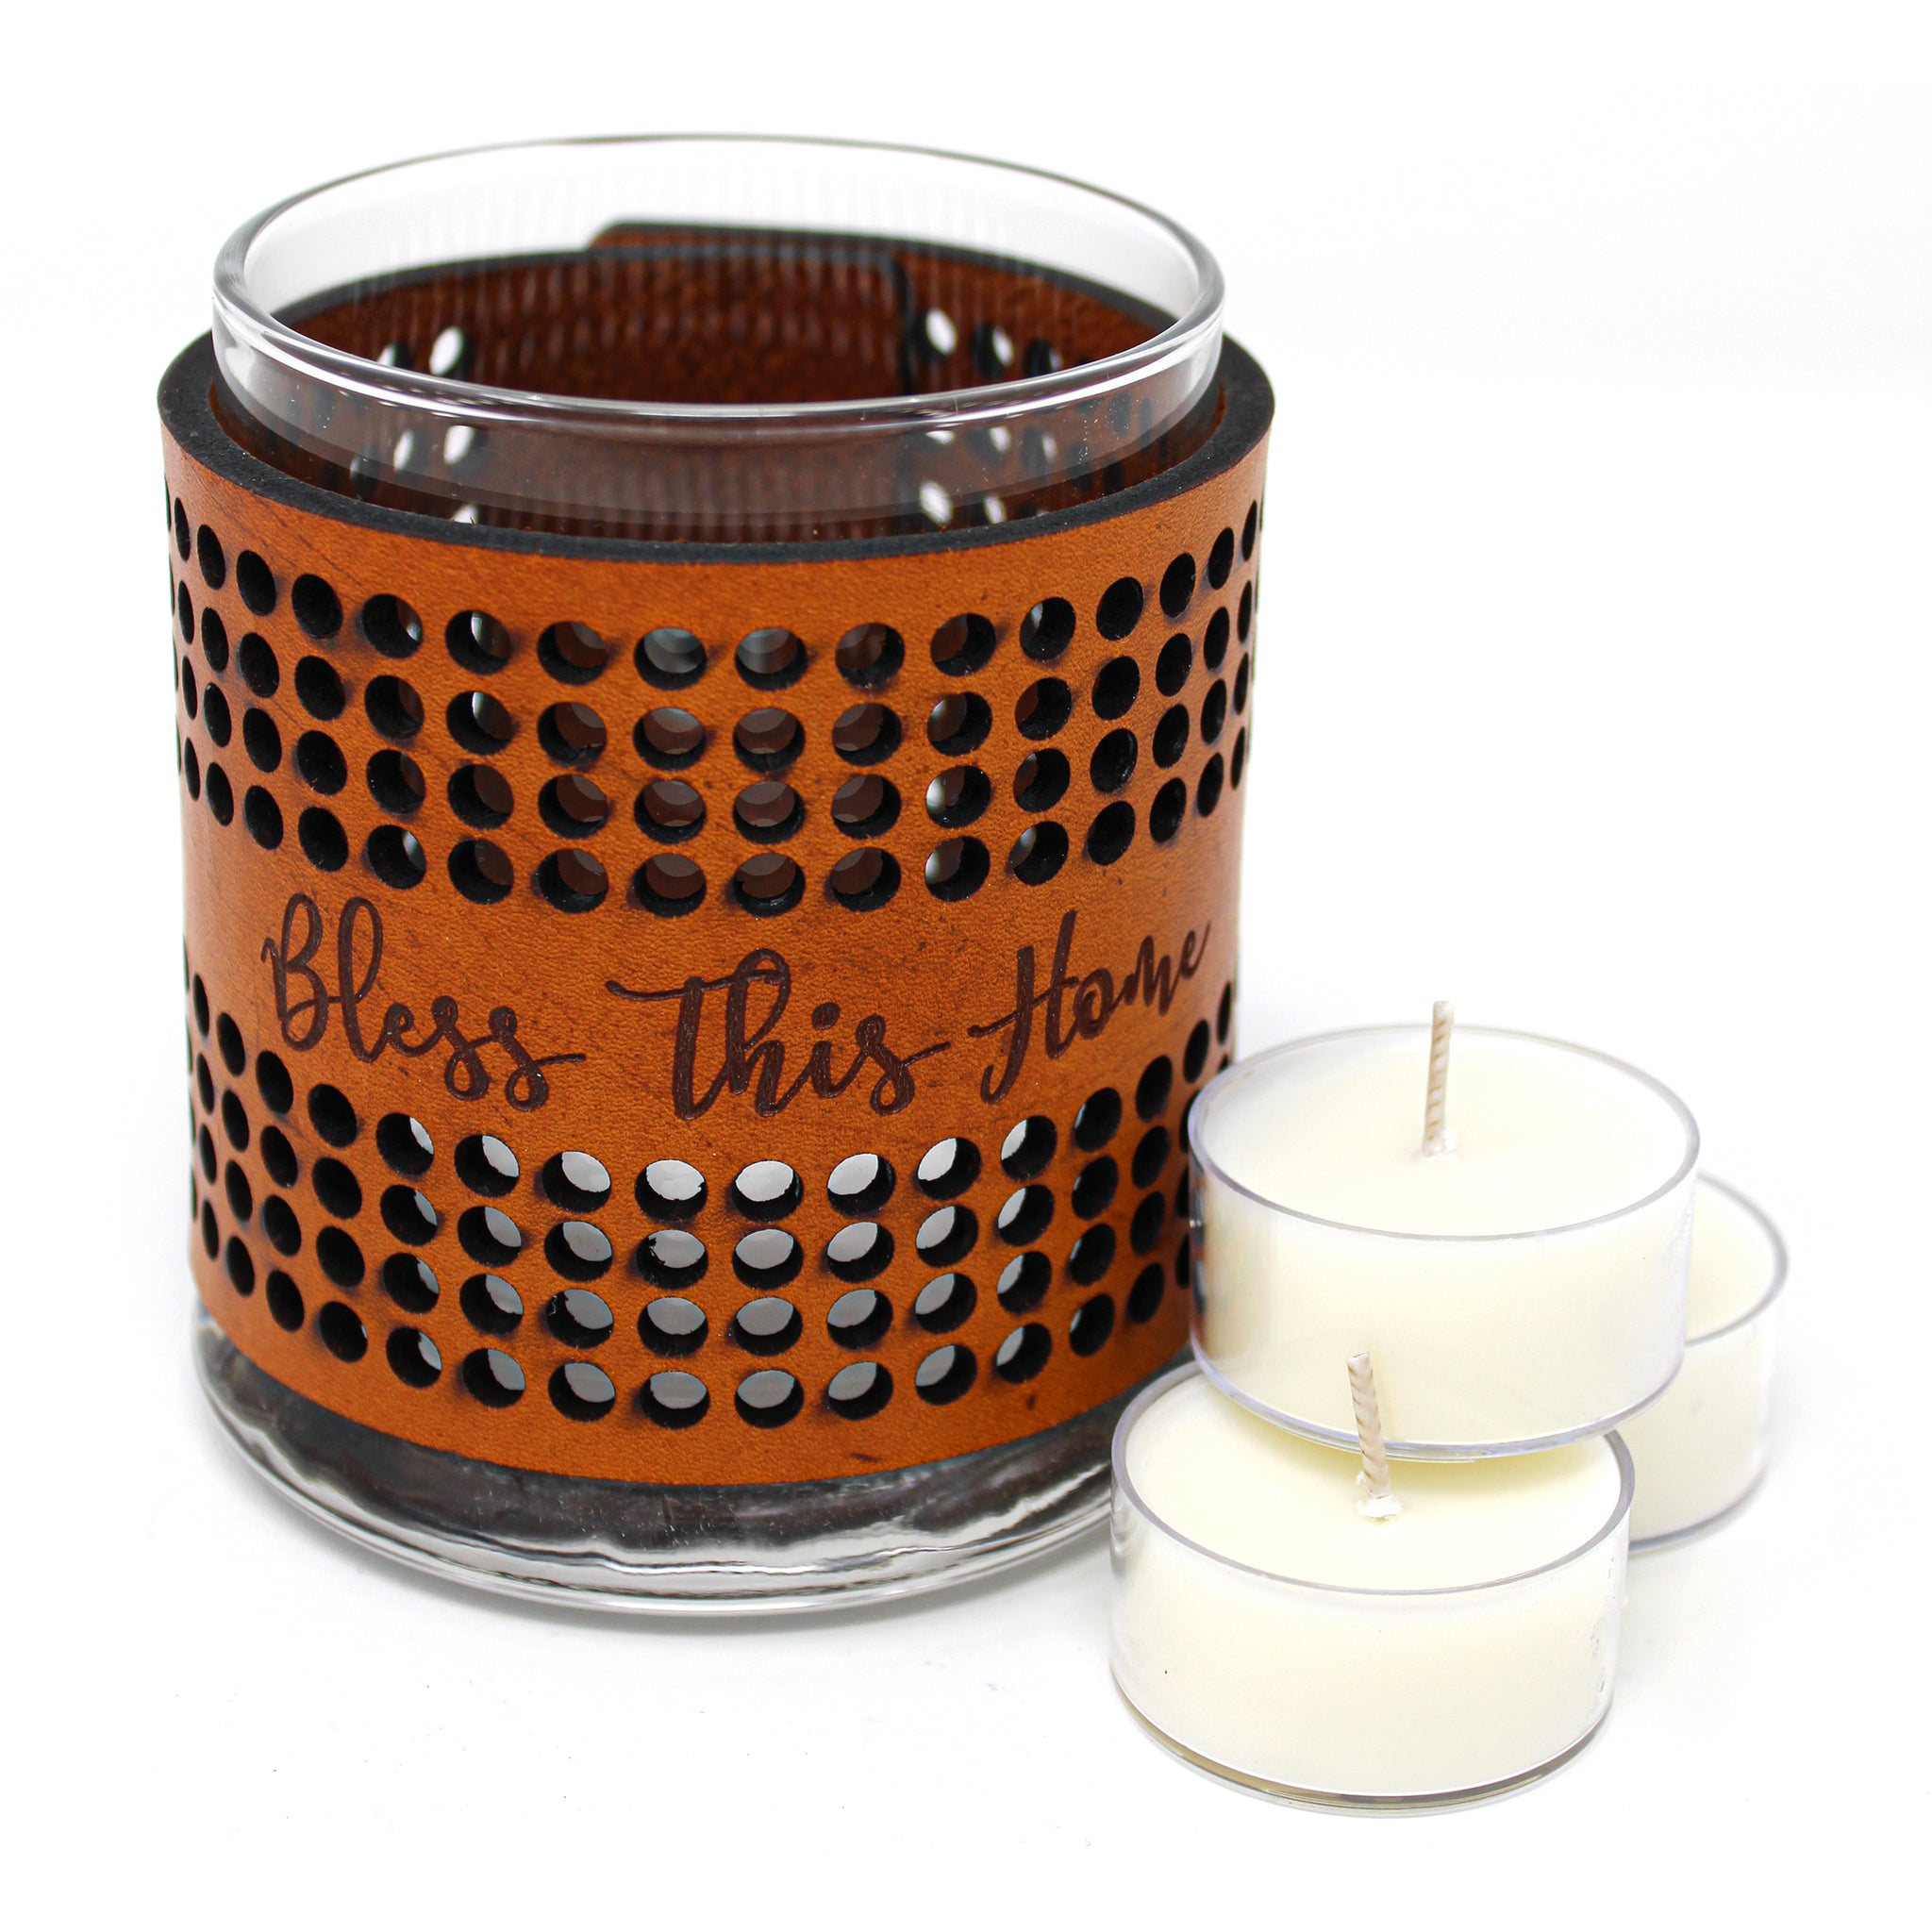 Leather Luminary Candle Set - Arched Circles - Bless This Home